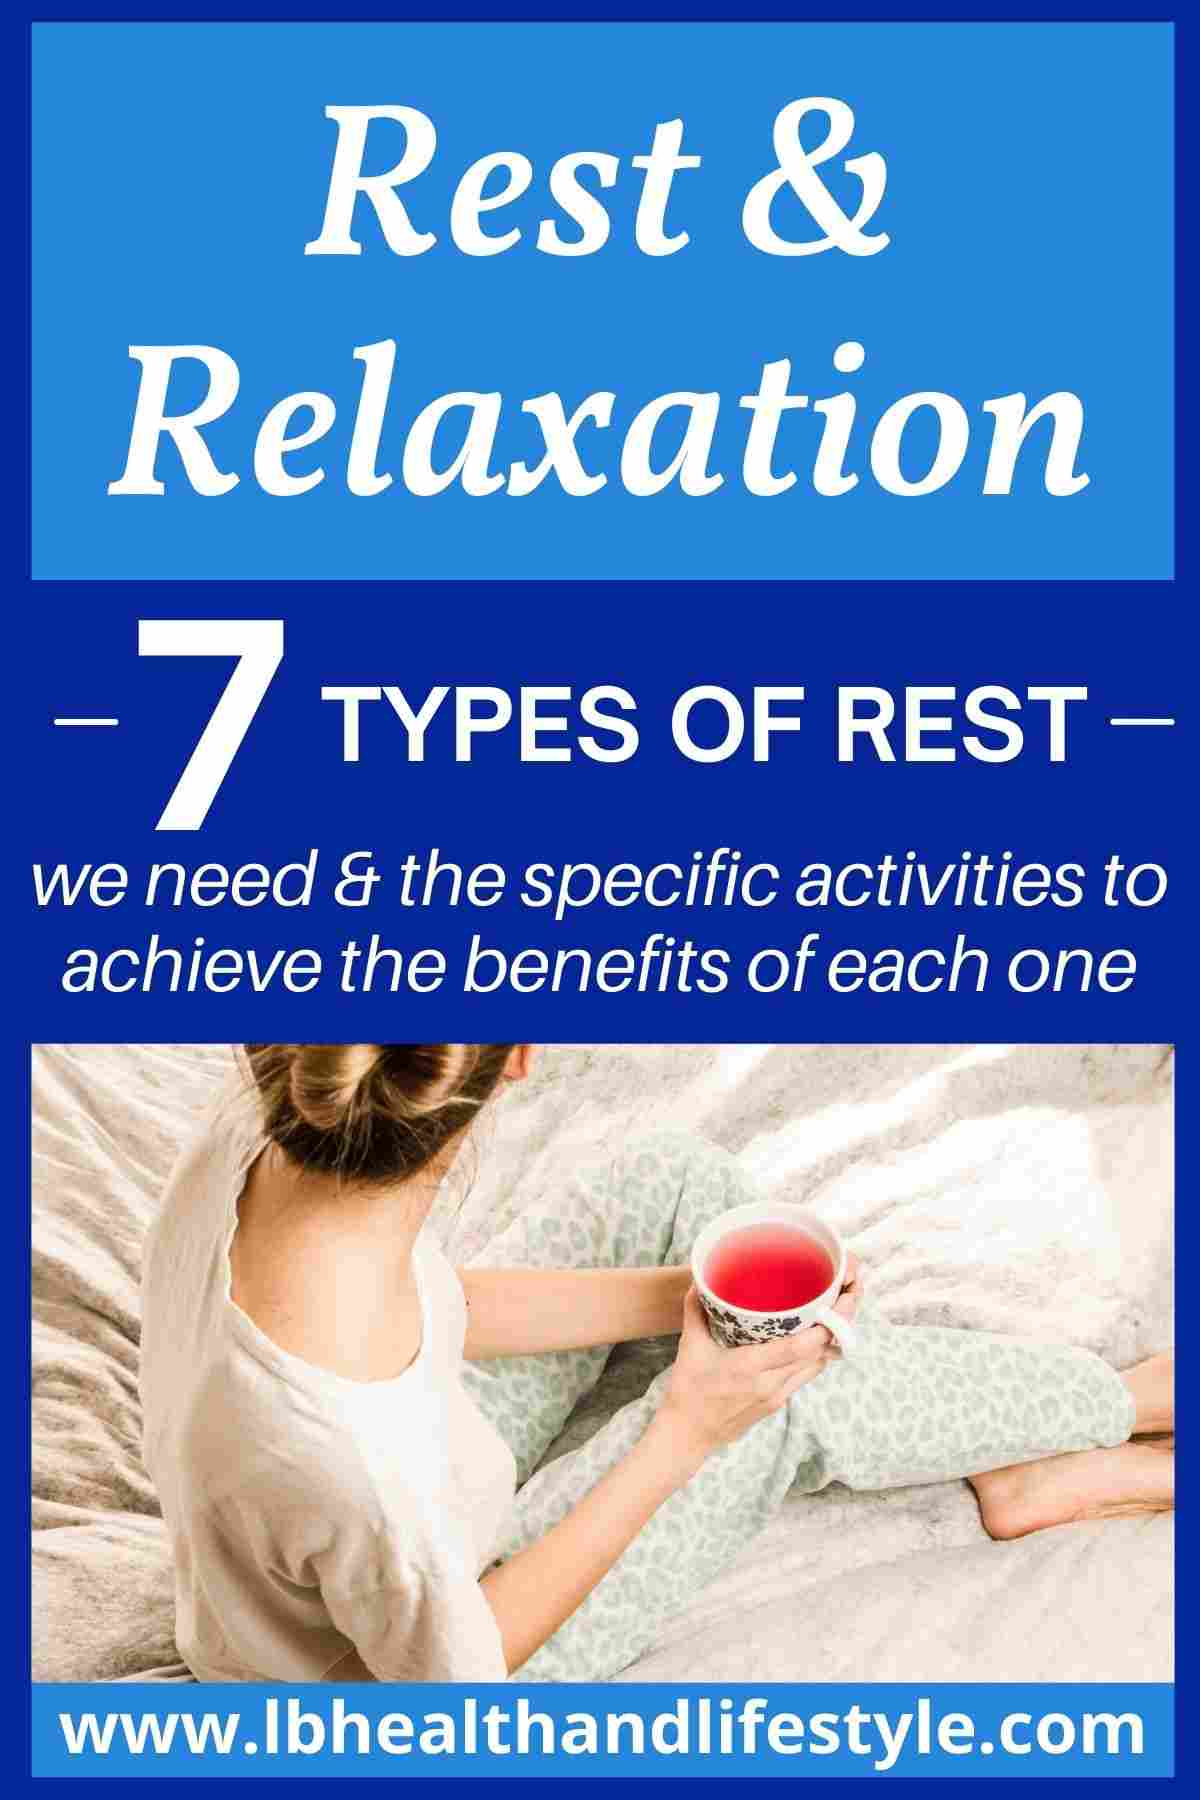 rest well 7 types of rest we need and activities to achieve benefits of each one